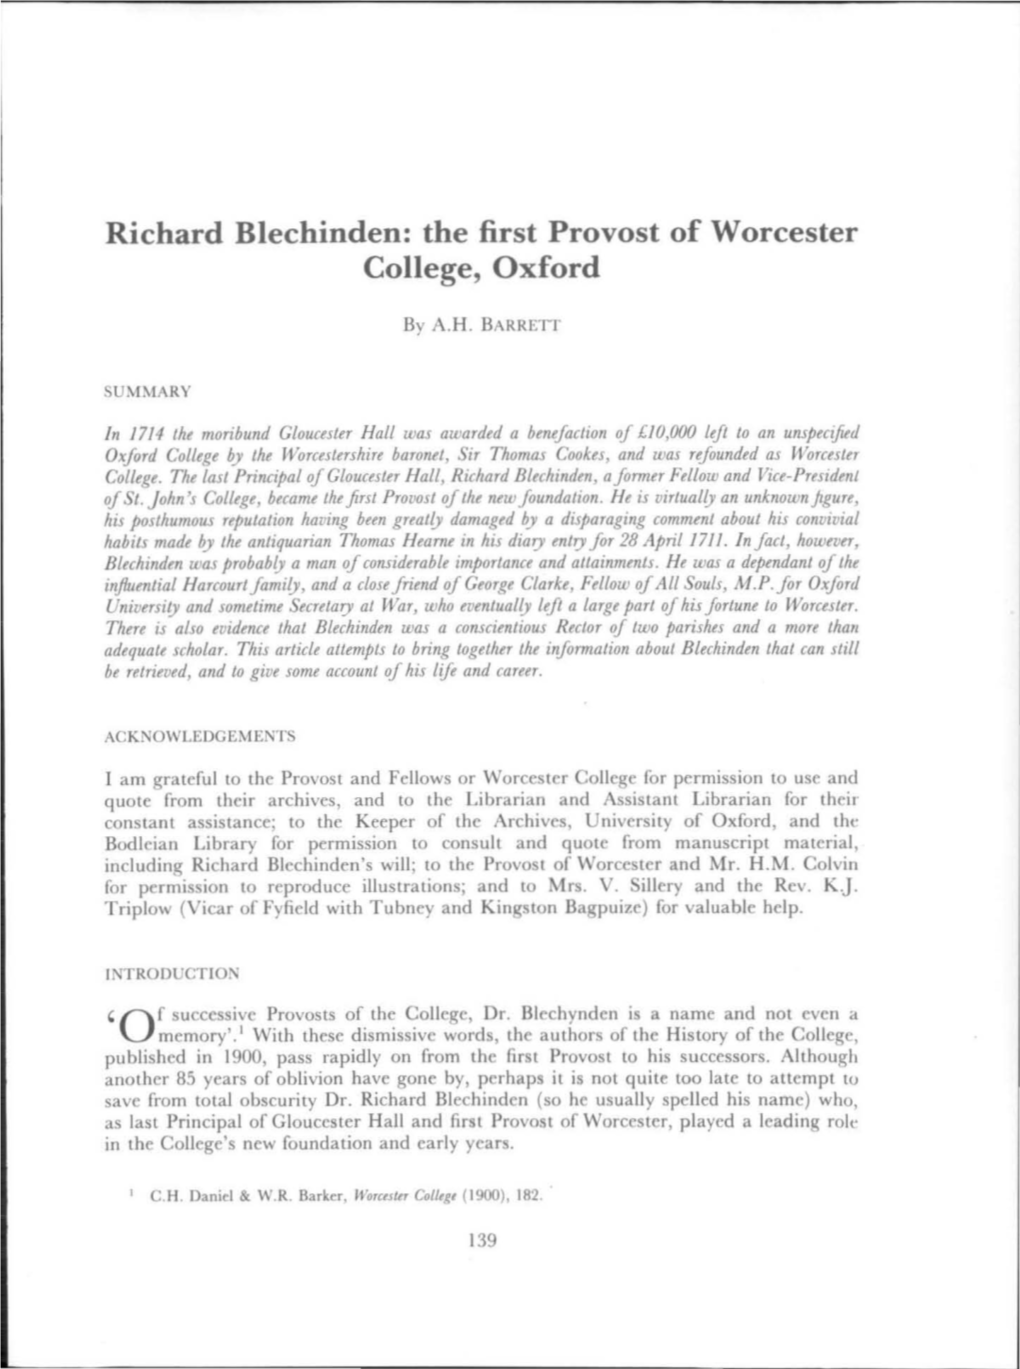 Richard Blechinden: the First Provost of Worcester College, Oxford